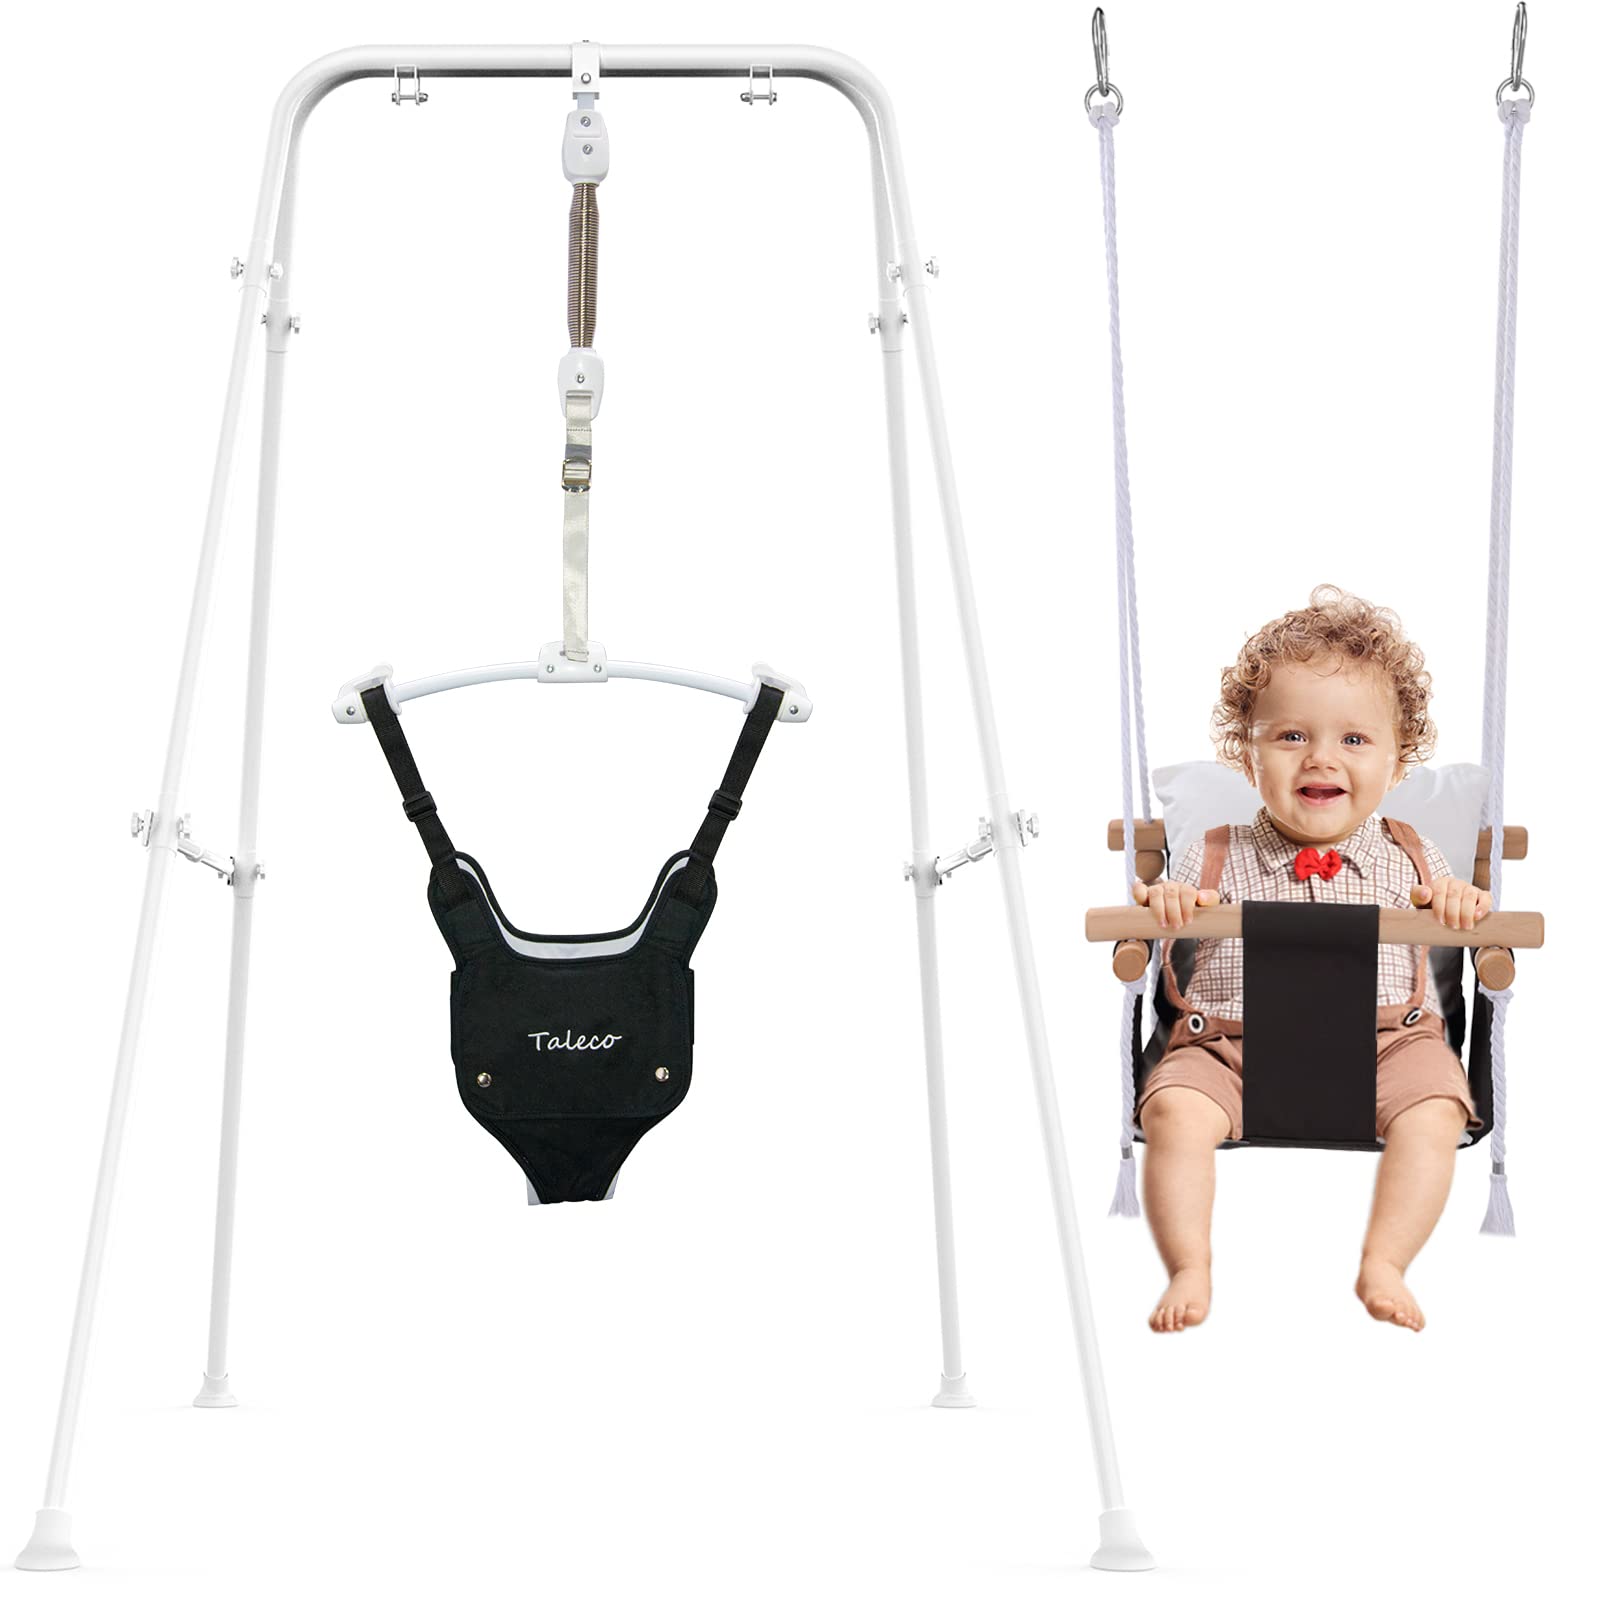 g taleco gear 2 in 1 Baby Jumper & Swing, Baby Jumper for Indoor and Outdoor Use, Baby Swing with Foldable Stand, Stable Toddler Swing Set